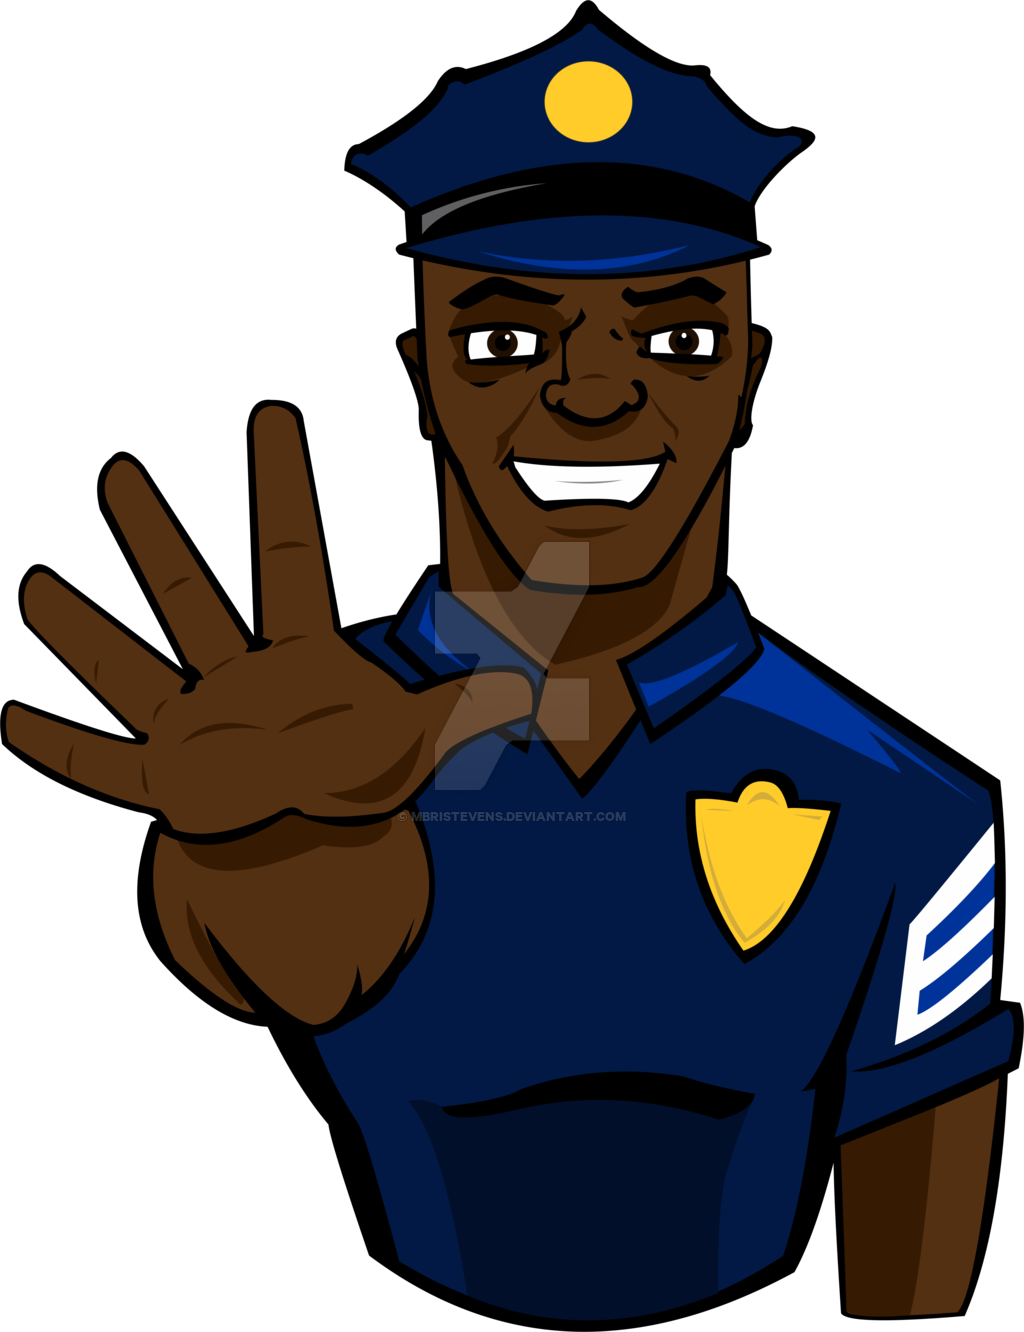 Police officer by mbristevens. Stop clipart cartoon